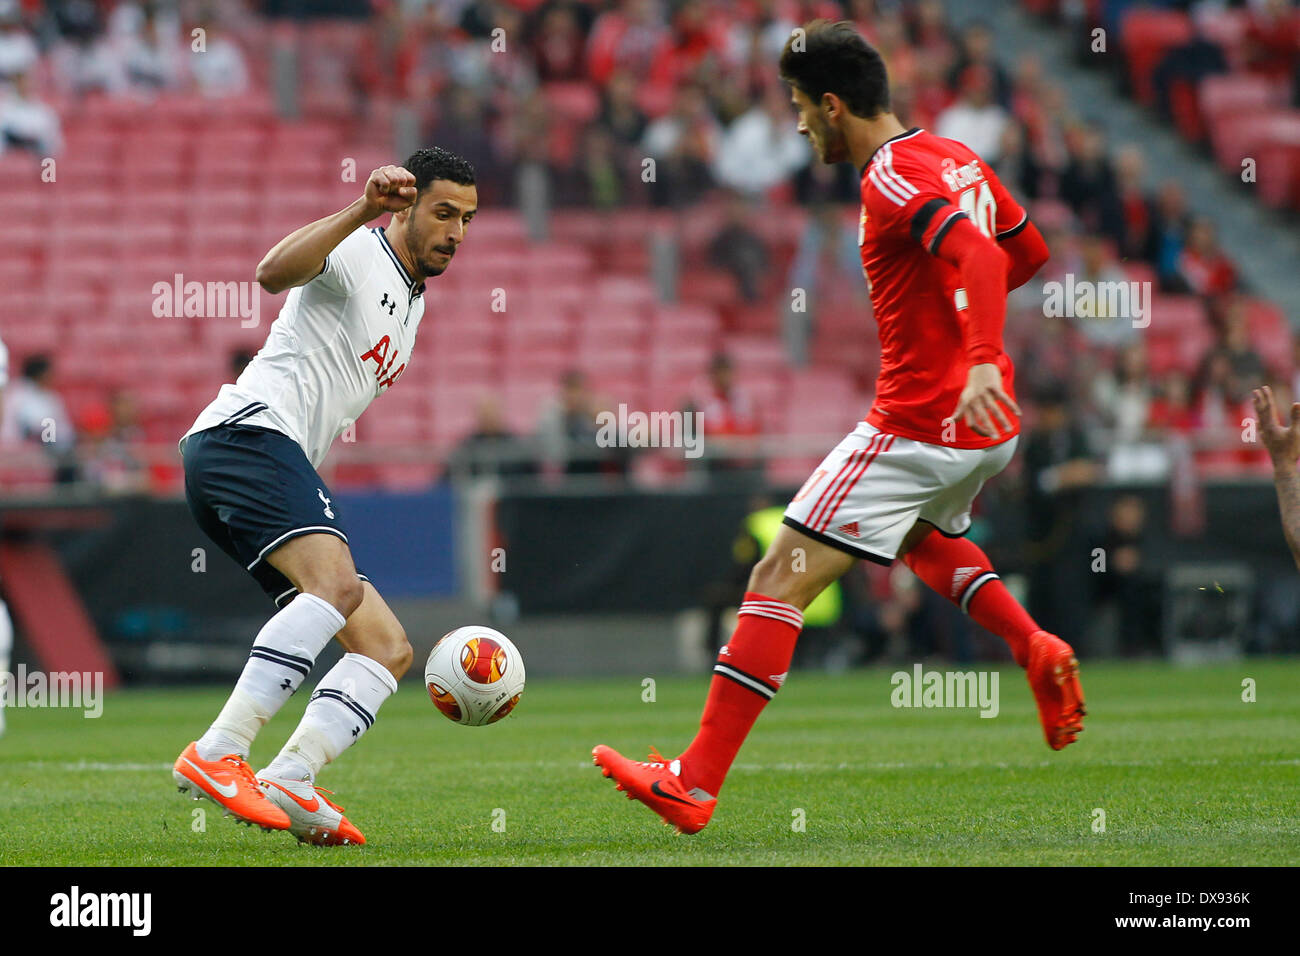 Benfica, Portfugal. 20th Mar, 2014. Tottenham's Belgian midfielder Nacer Chadli in action with Benfica's Portuguese midfielder Andre Gomes during the UEFA Europa League round of 16 second leg football match between SL Benfica and Tottenham Hotspur, at Luz Stadium in Lisboa. Credit:  Filipe Amorim/NurPhoto/ZUMAPRESS.com/Alamy Live News Stock Photo